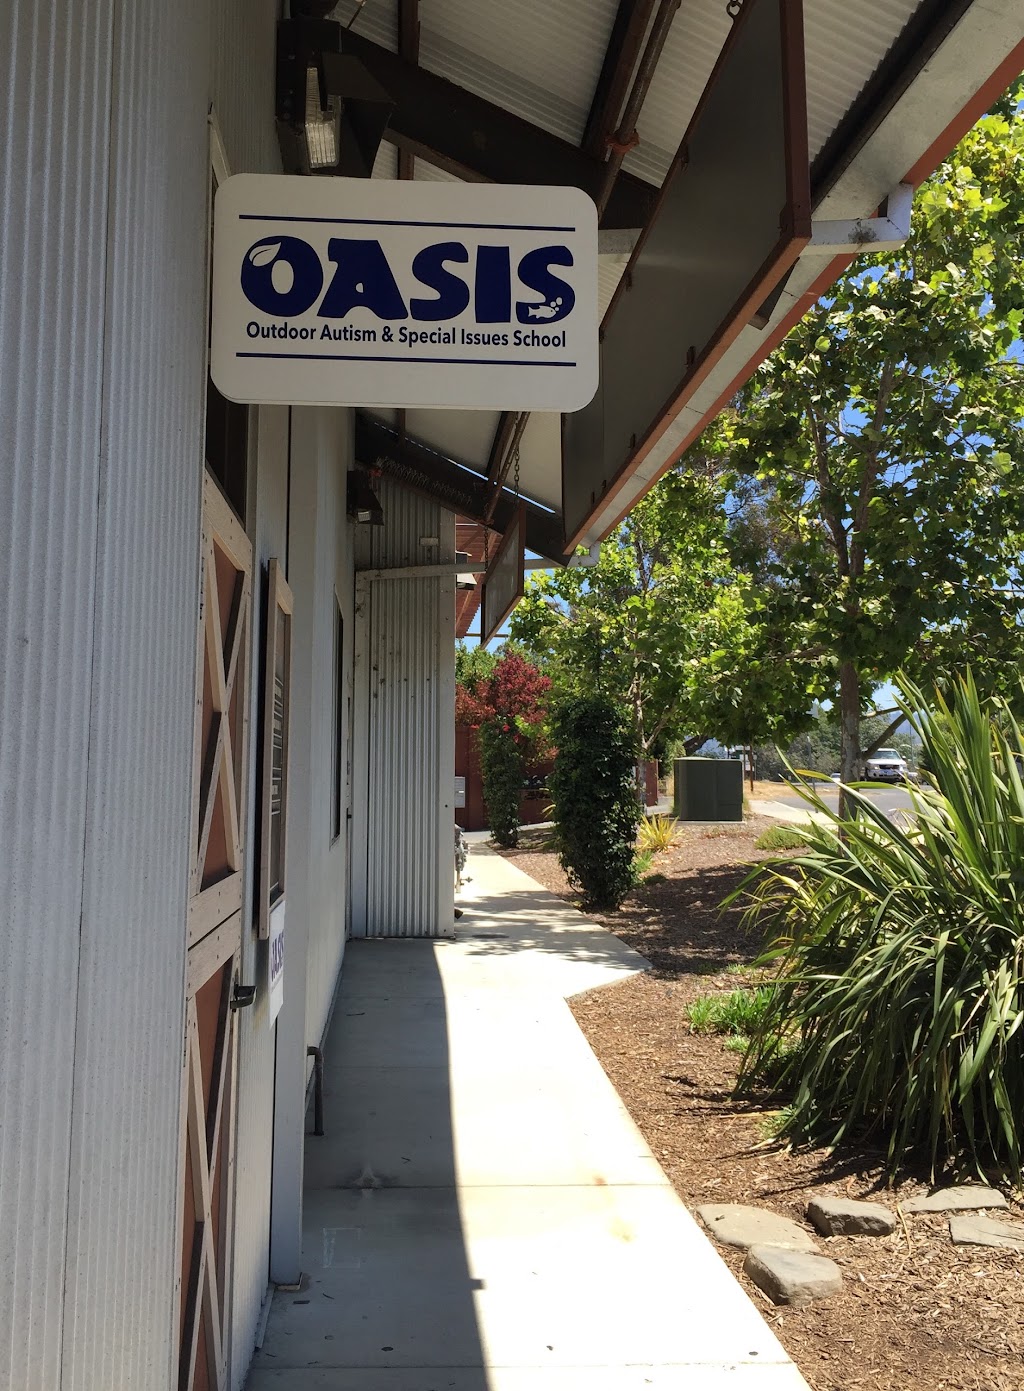 OASIS: Outdoor Autism & Special Issues School | 80 Airport Blvd # 206, Freedom, CA 95019 | Phone: (831) 687-9047